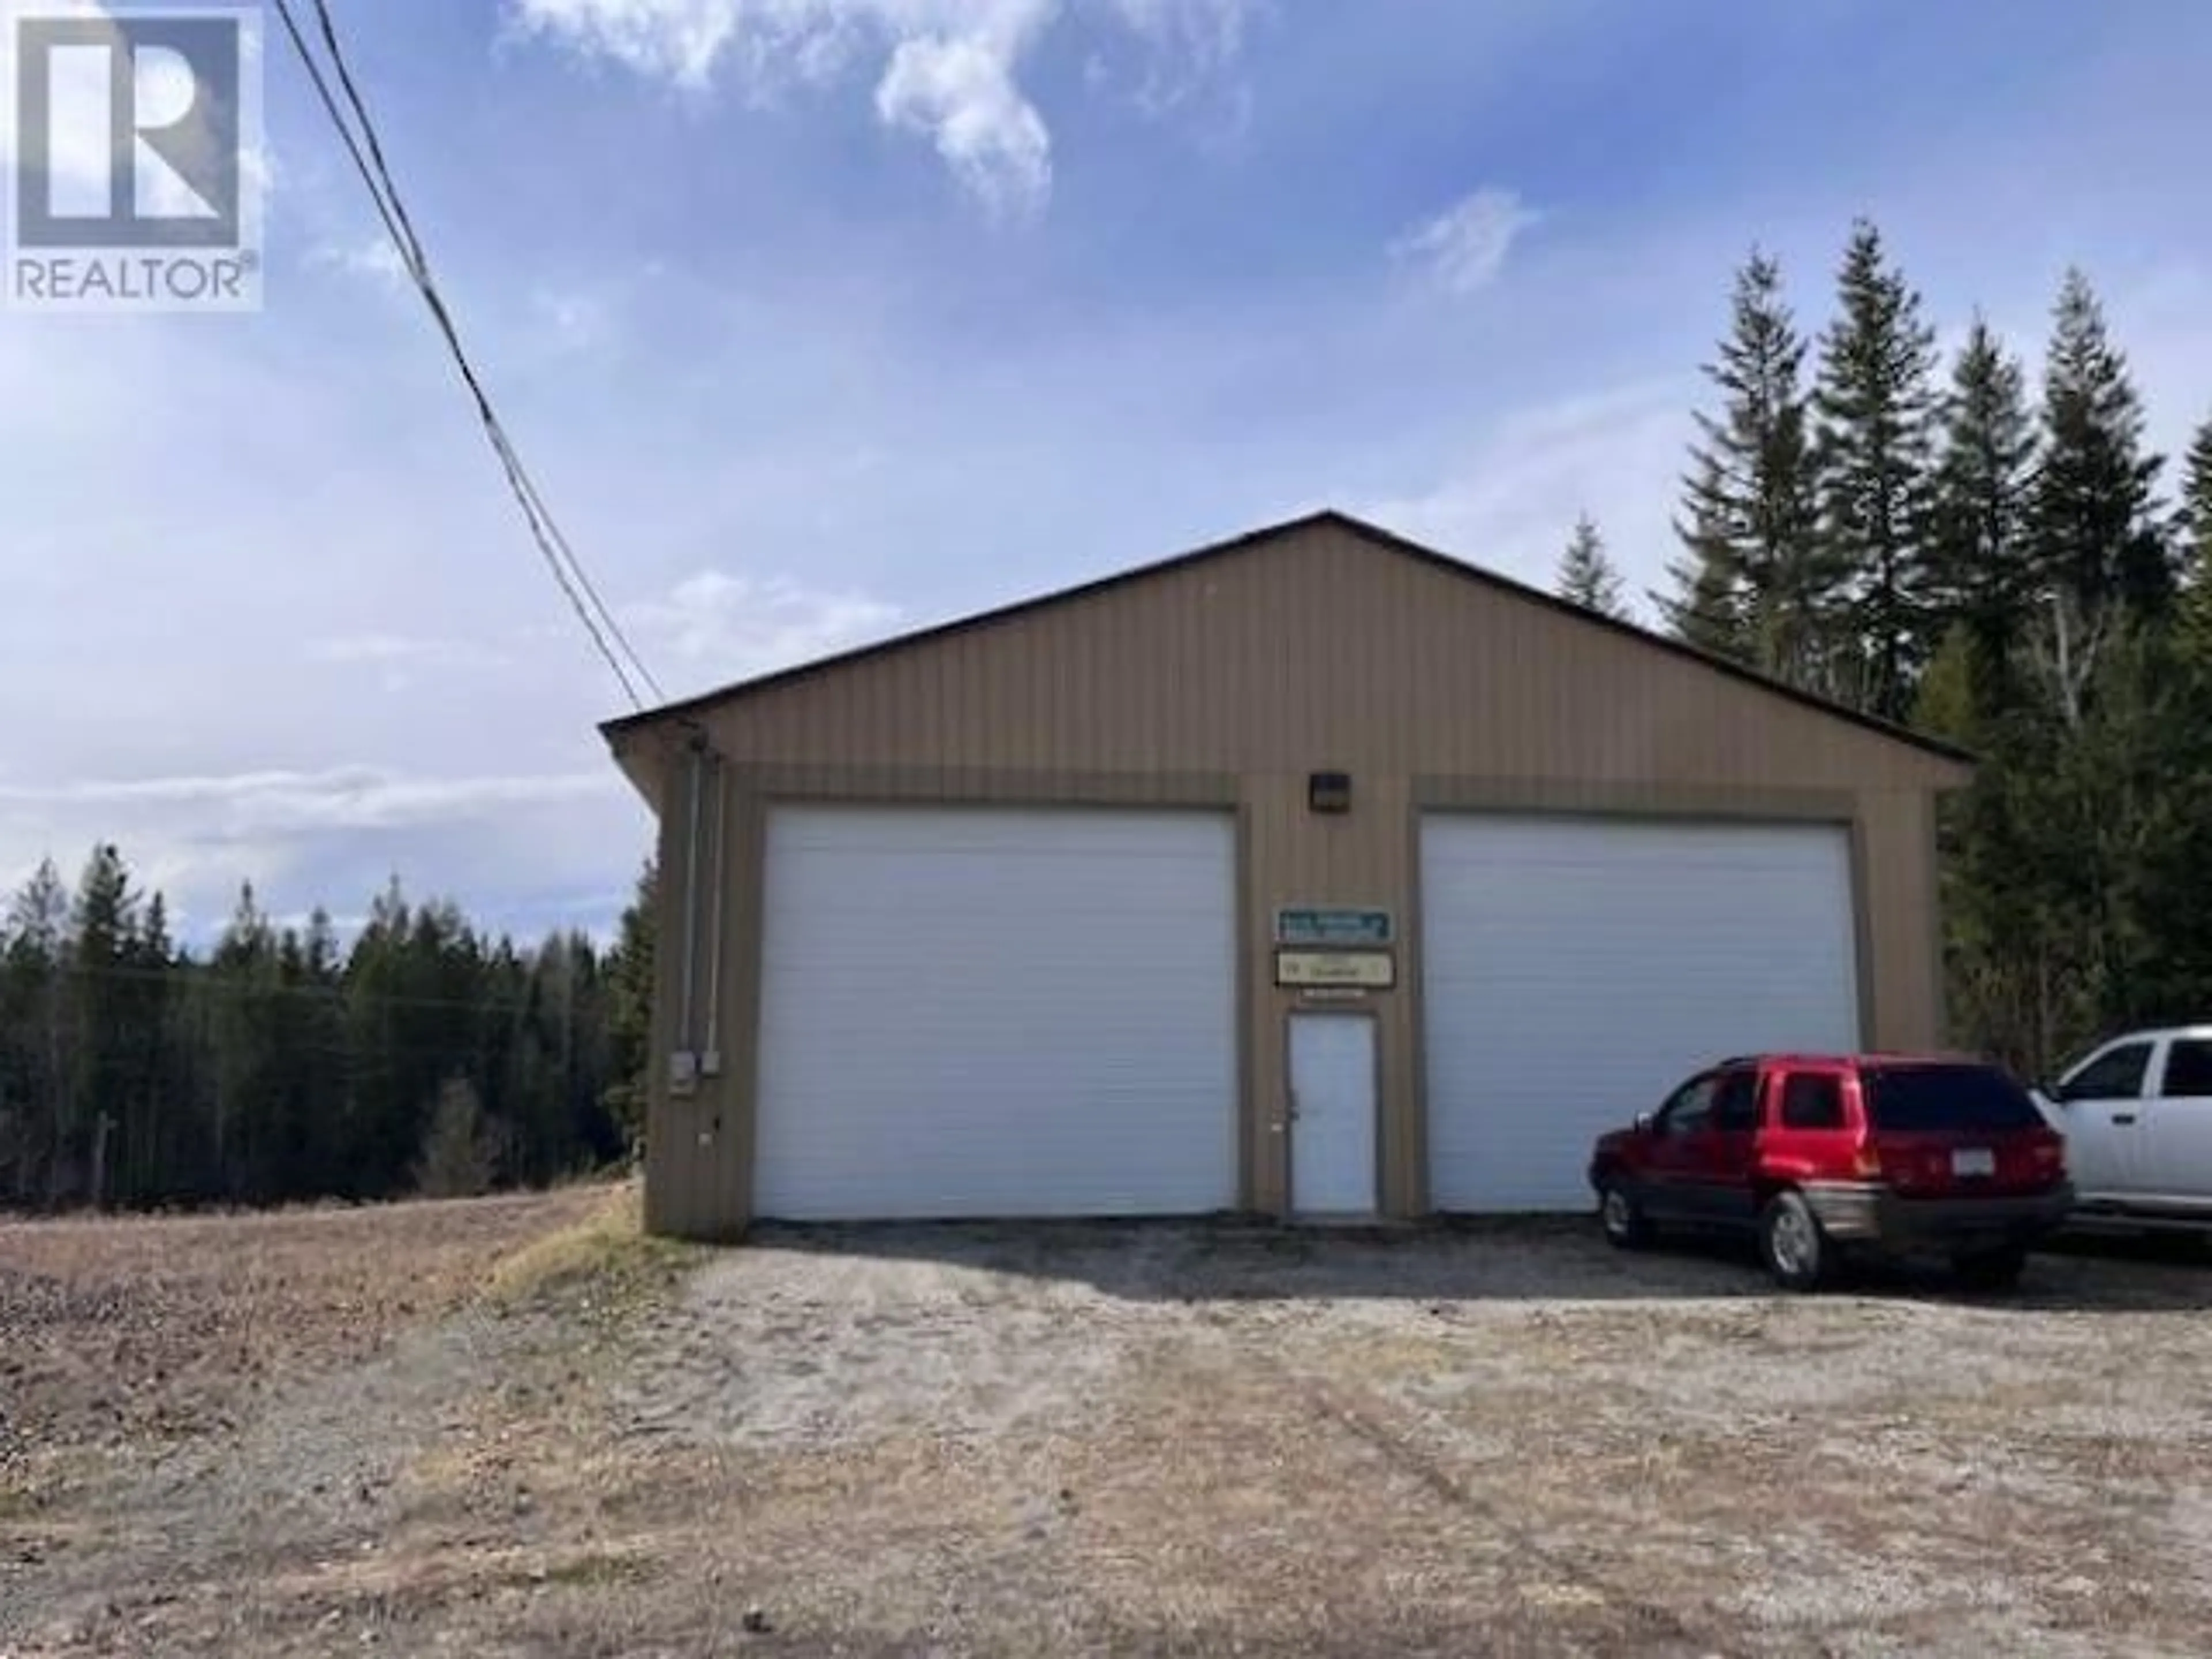 Shed for 4605 S 97 HIGHWAY, Quesnel British Columbia V2J6P4